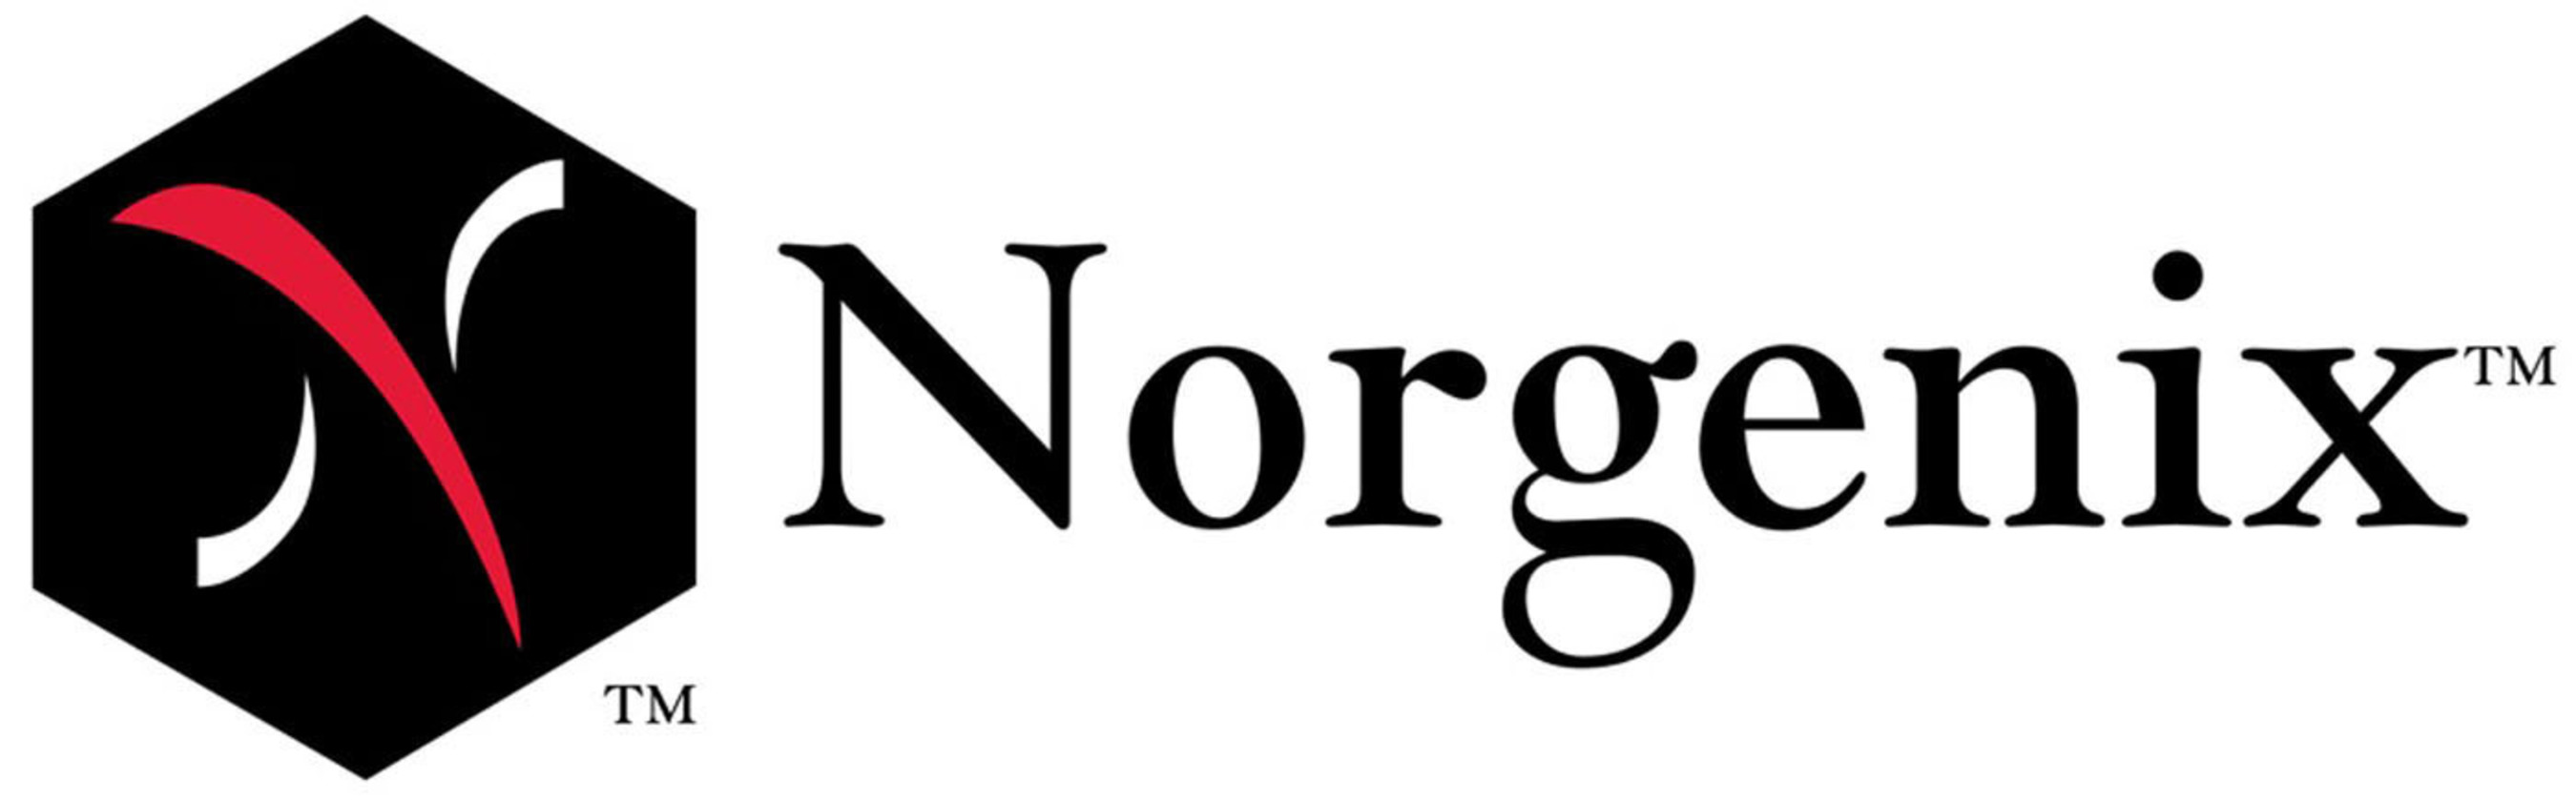 Norgenix, a wholly owned subsidiary of the J M Smith Corporation, is a North American specialty pharmaceutical, medical device, and biotech company that engages in the development, commercialization, and sales of pharmaceutical products in the women's health arena. Founded in 2008, Norgenix offers quality products that provide solutions to the unmet needs within women's health. With products spanning the continuum of care from pharmaceutical therapies to medical devices, Norgenix is licensed to sell, market, and distribute prescription drug products and medical devices in all 50 United States. (PRNewsFoto/Norgenix Pharmaceuticals, LLC) (PRNewsFoto/NORGENIX PHARMACEUTICALS, LLC)